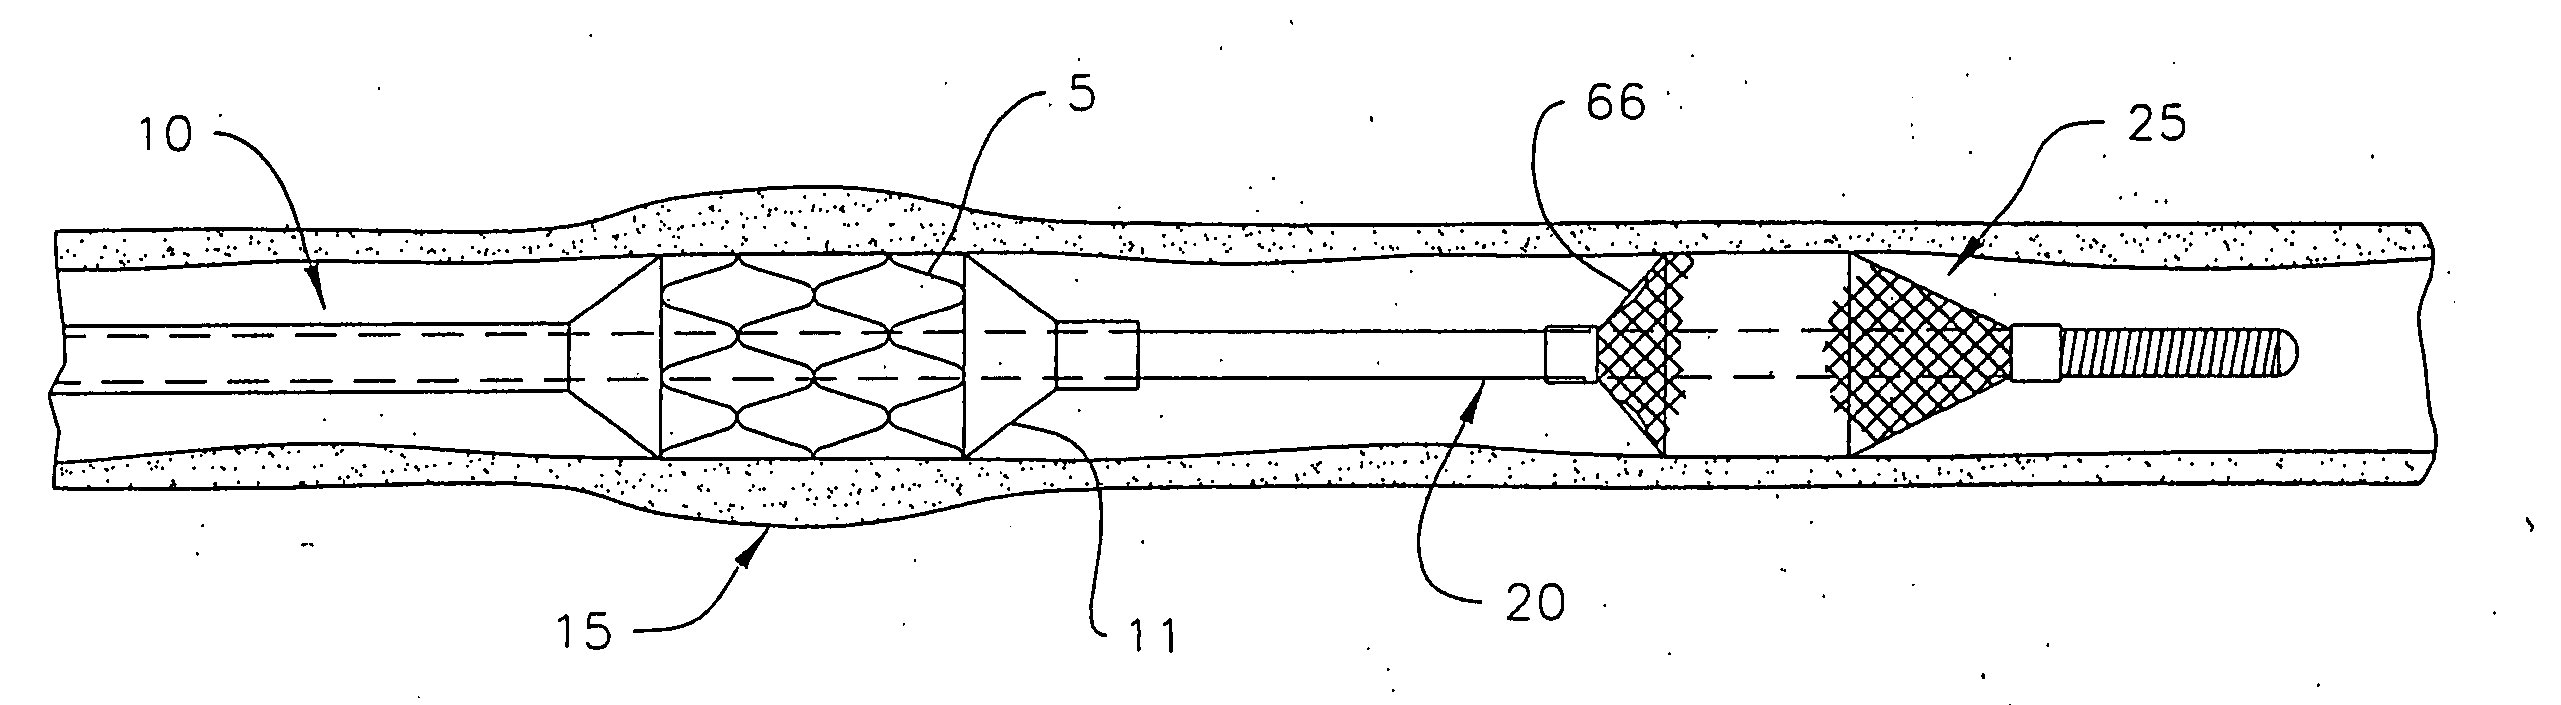 Guidewire apparatus for temporary distal embolic protection